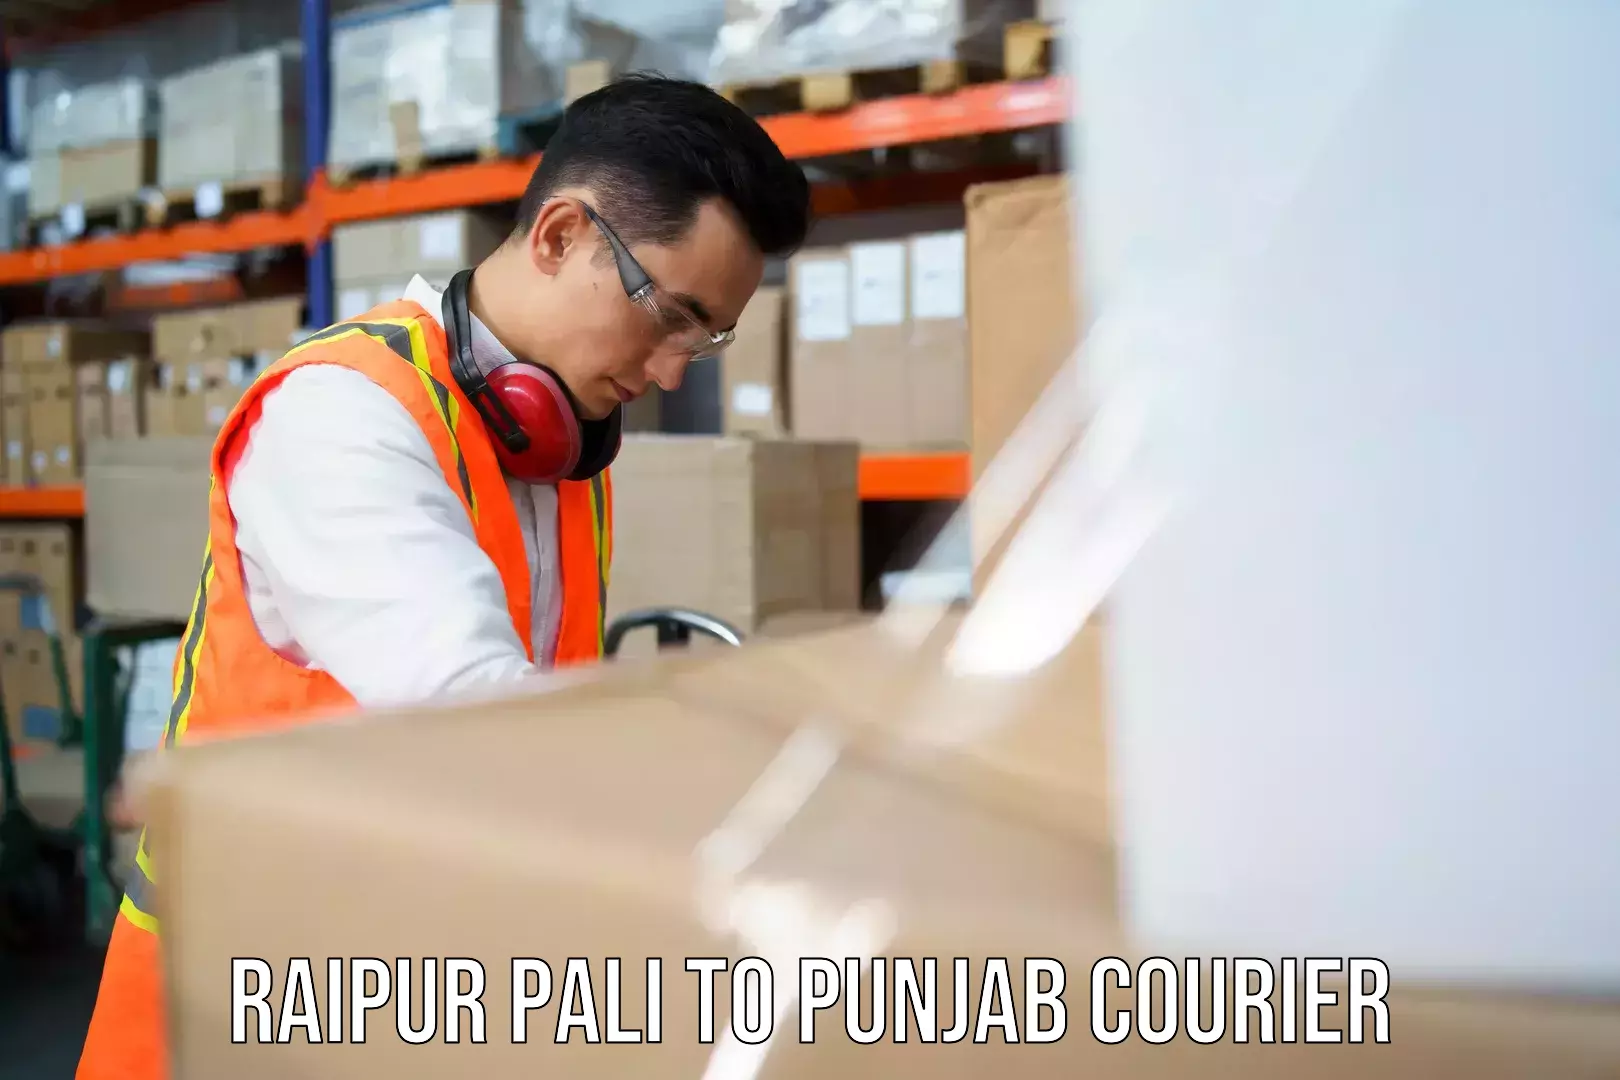 Courier service innovation Raipur Pali to Phillaur